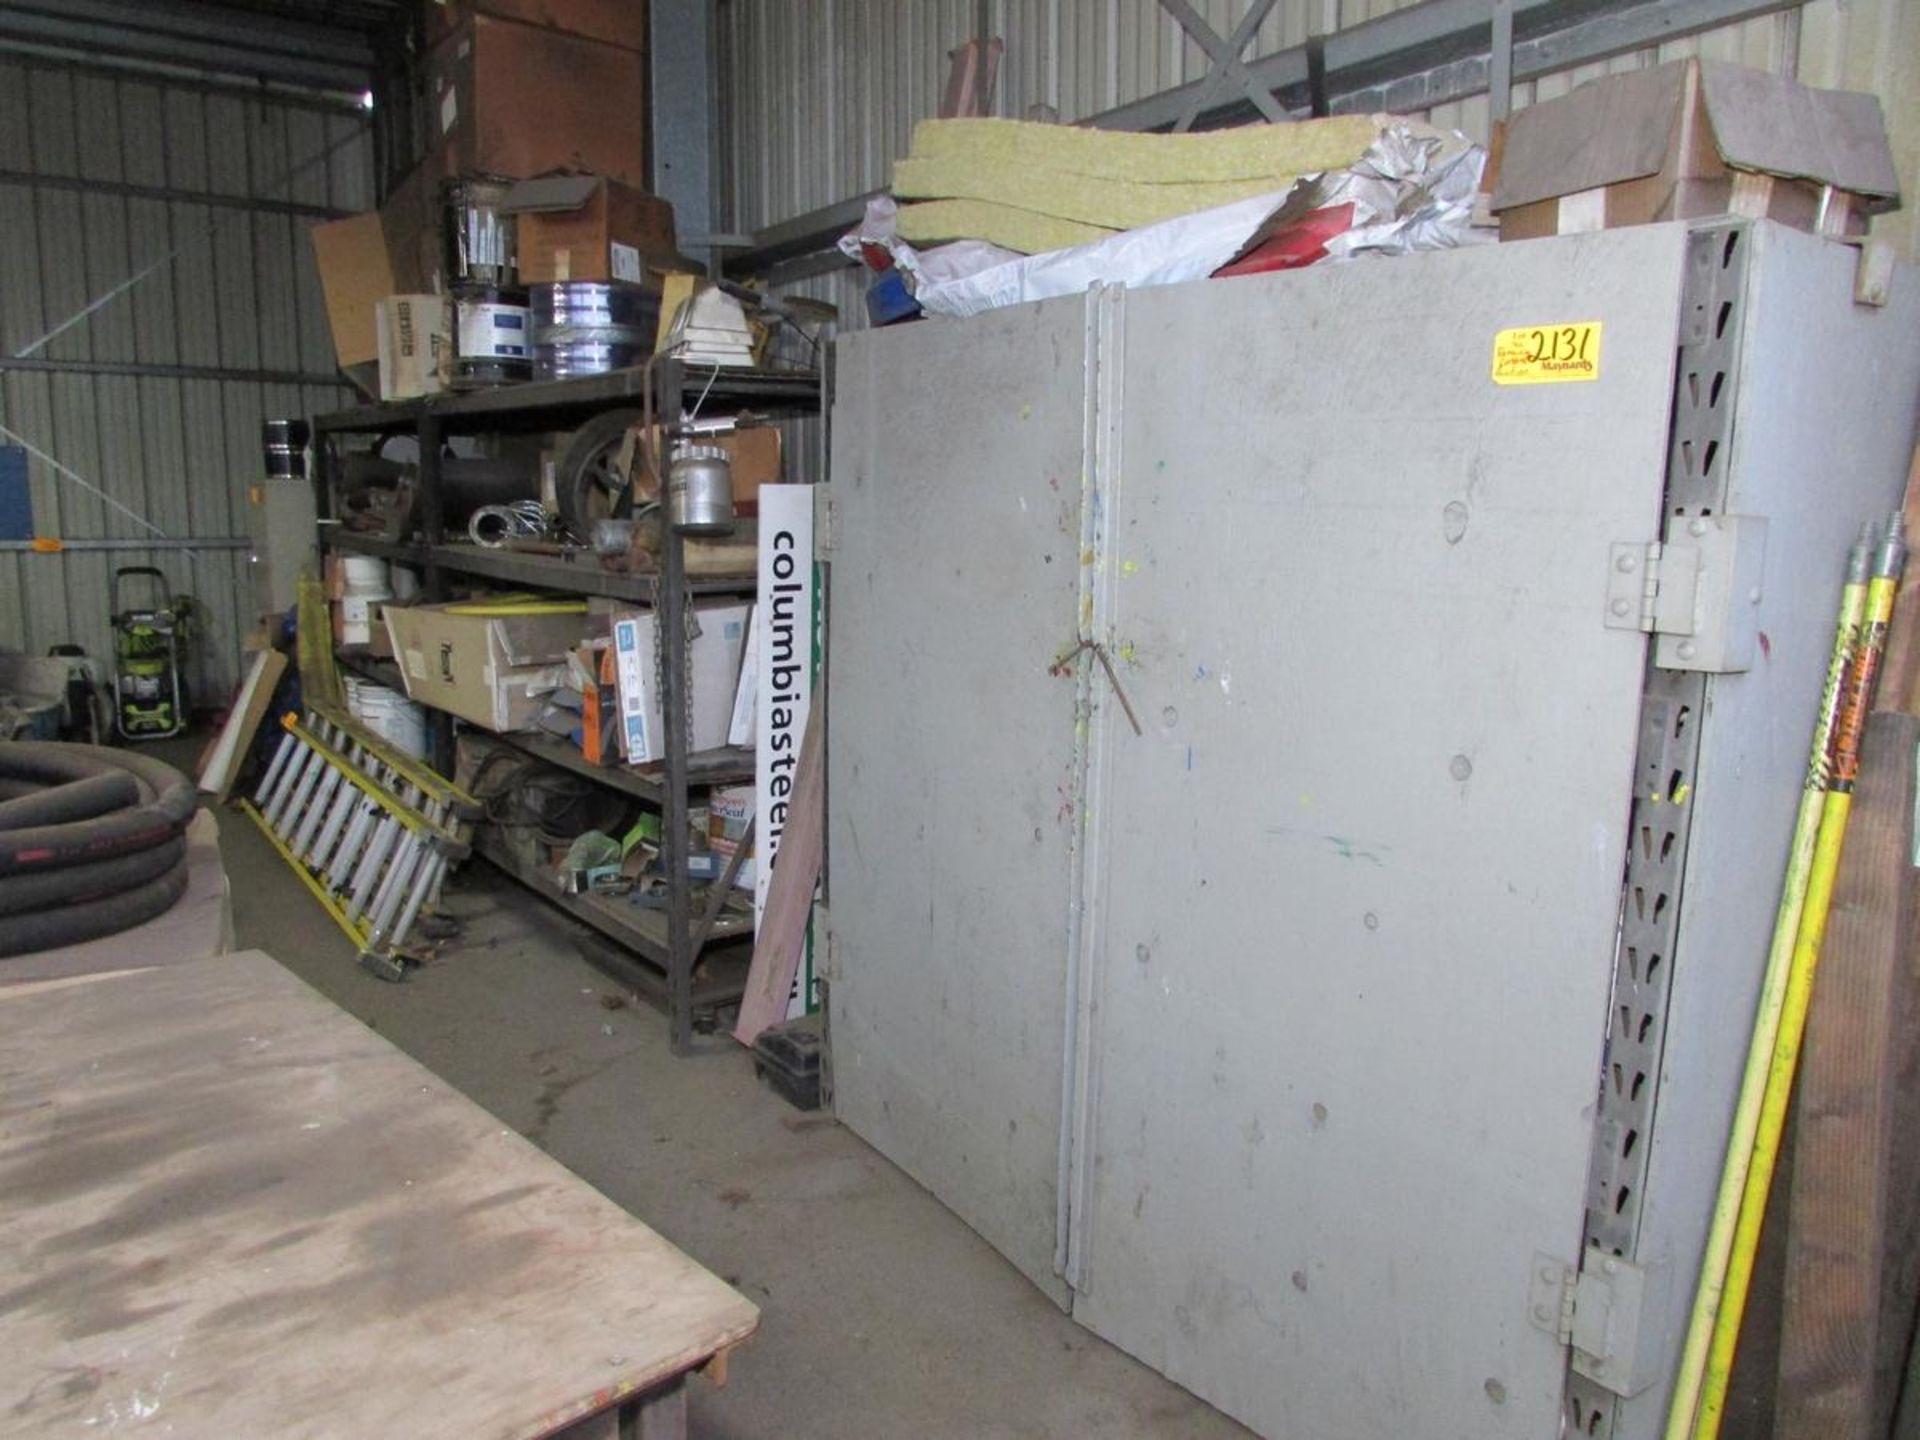 Remaining Contents of Maintenance Storage Cage